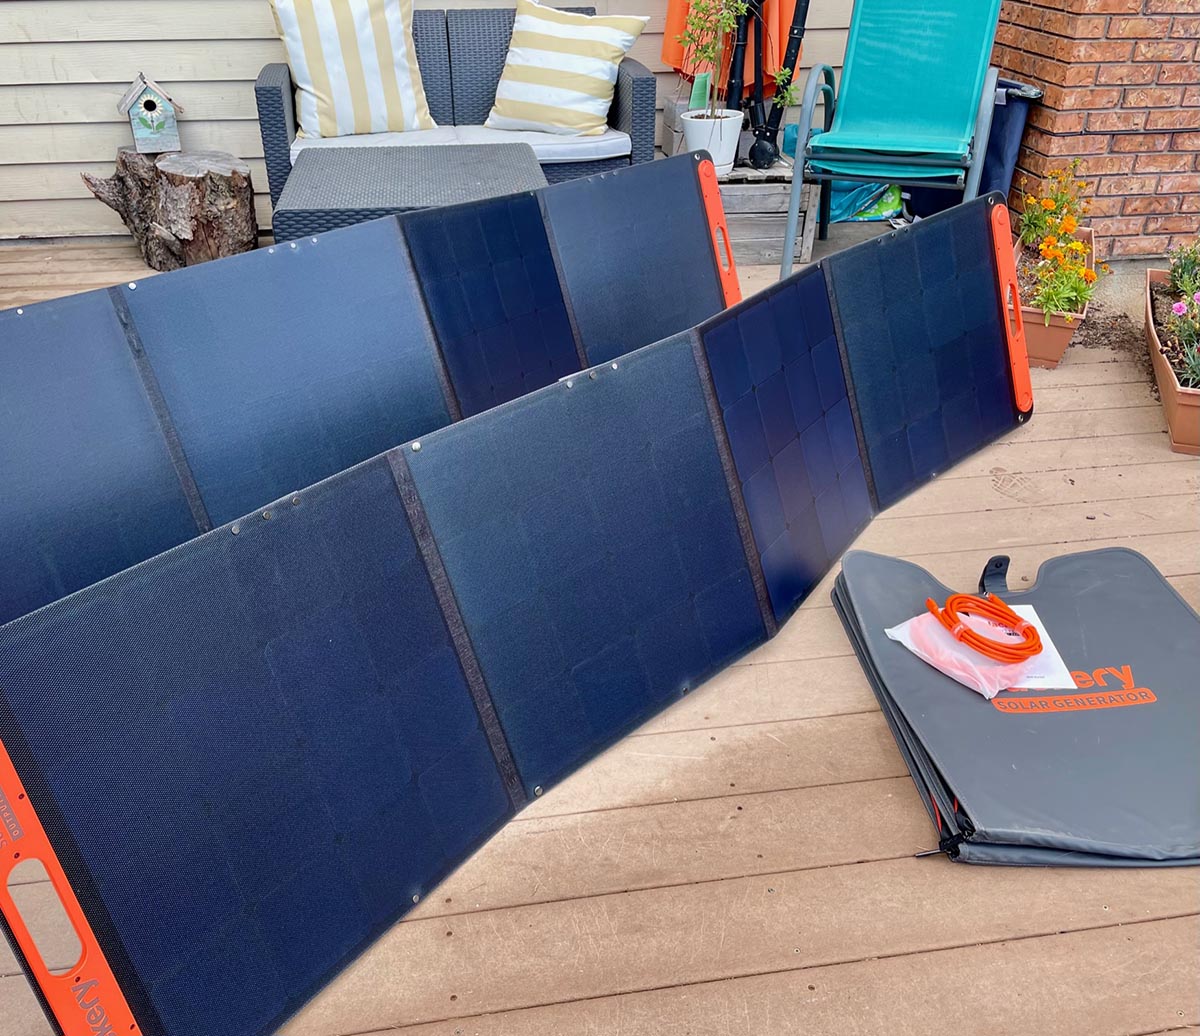 The Jackery 3000 Pro Solar Generator solar panels set up on a deck next to their carrying bags